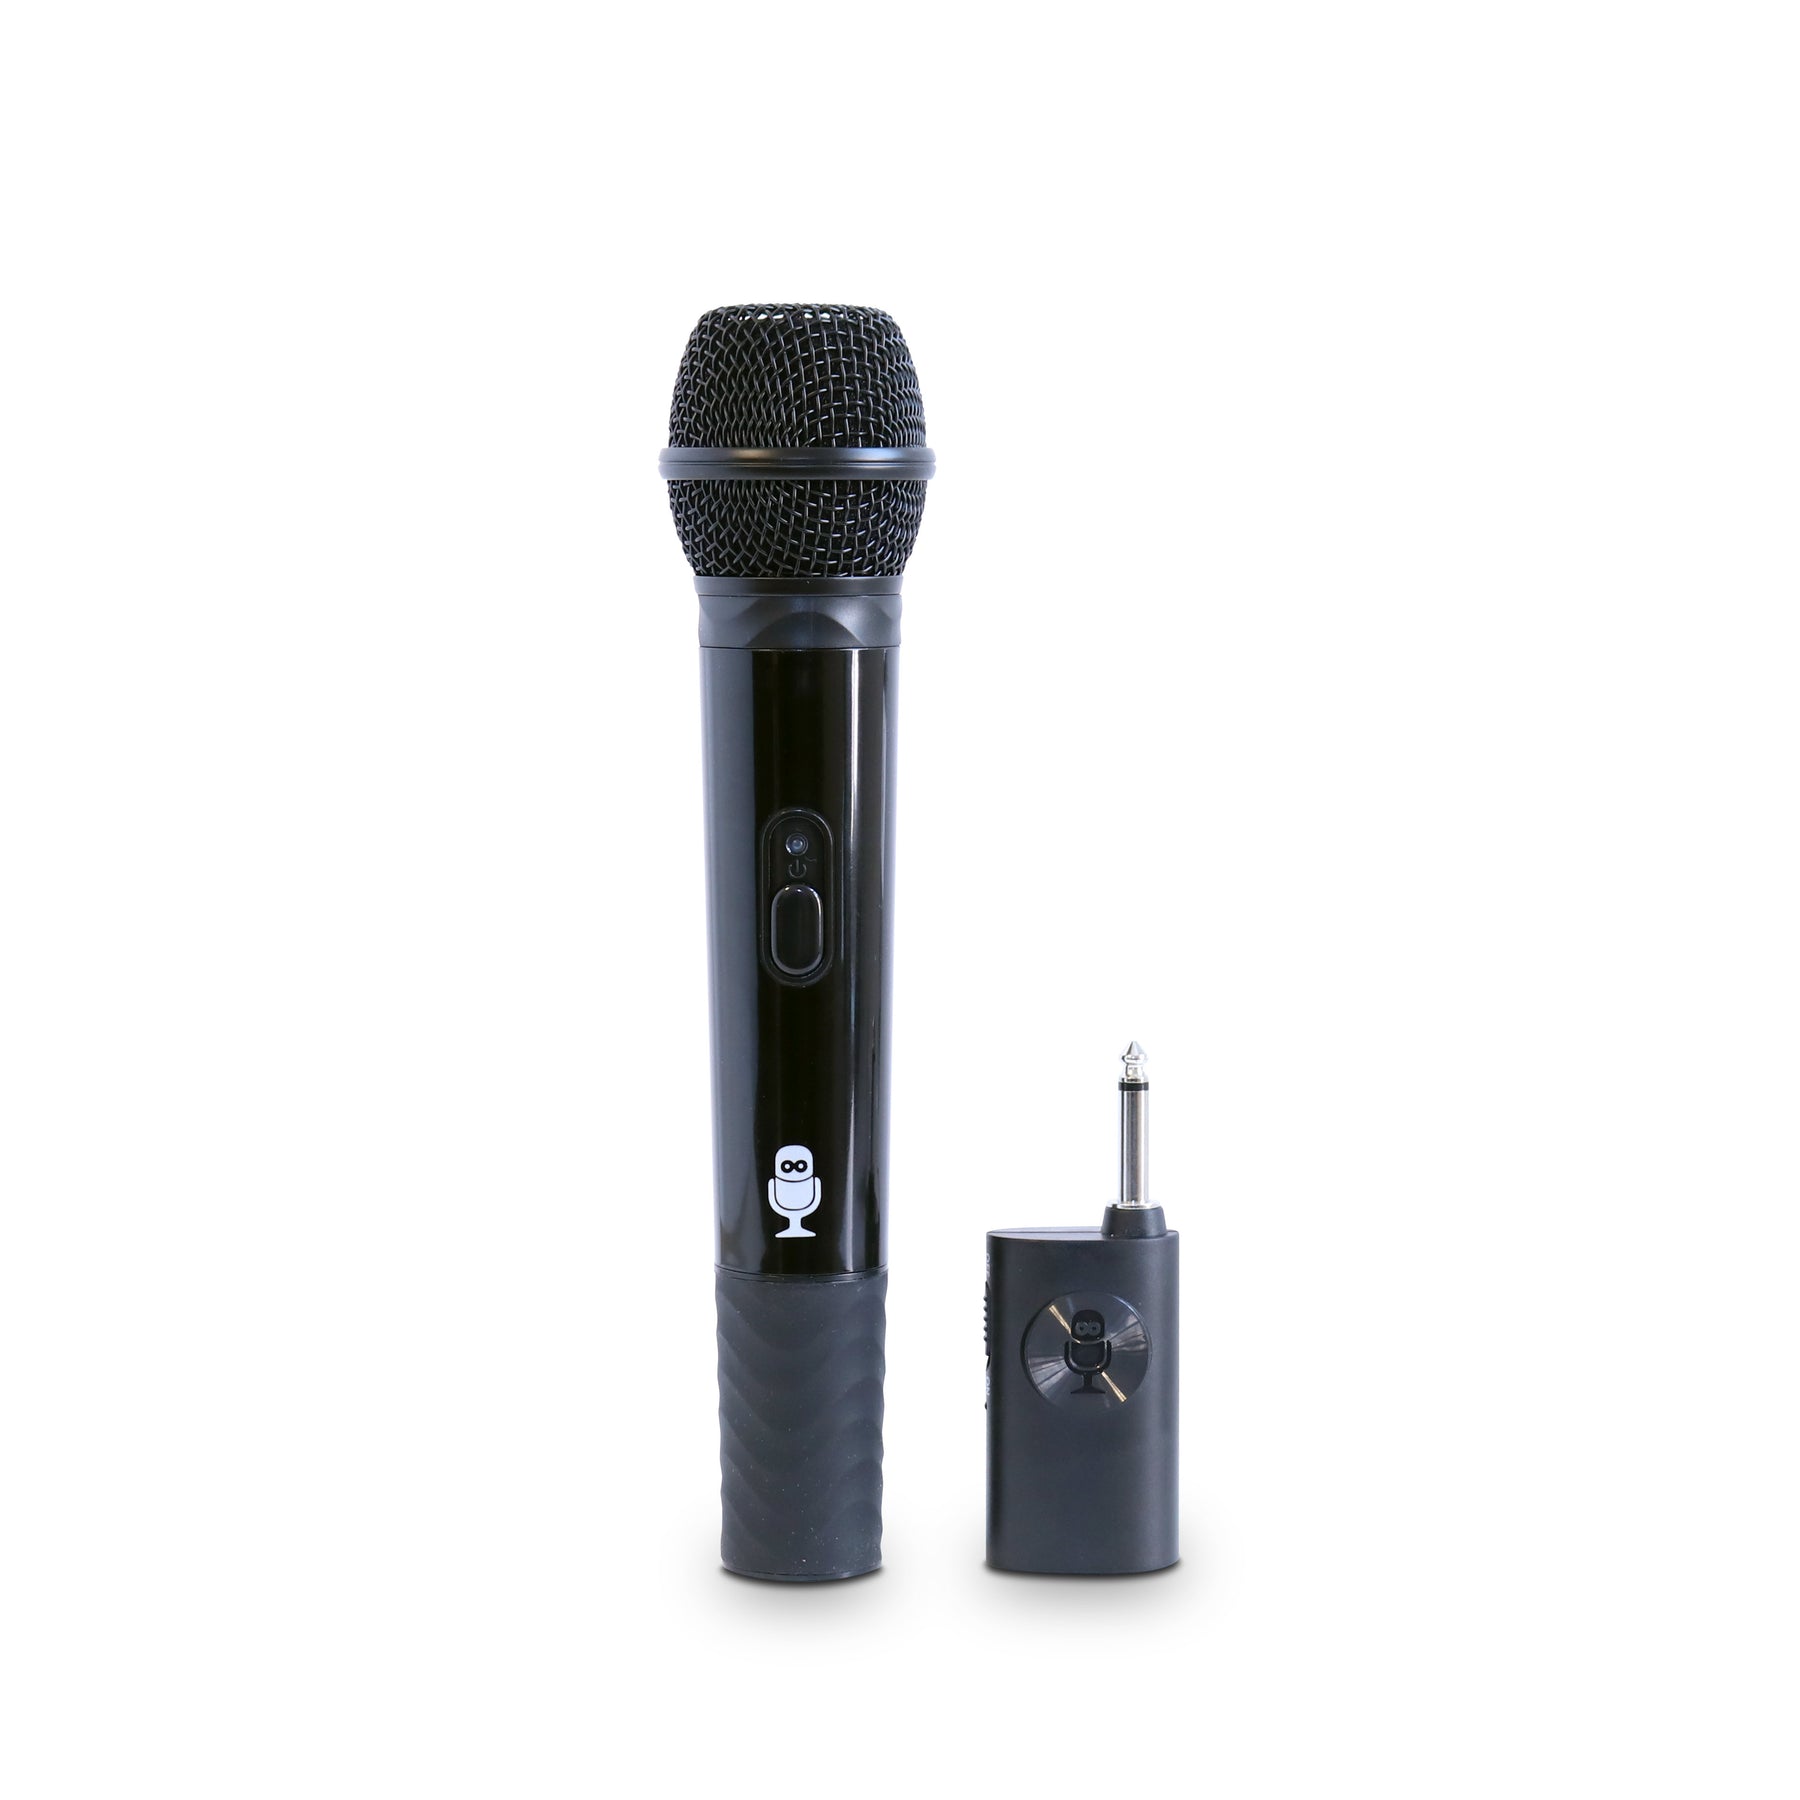 Karaoke Machine, Mini Portable Bluetooth Karaoke Singing Speaker for Adults  Kids, with 2 Wireless Mics and Dynamic Lights, Ideal Gifts for Girls Boys  Family Home Party 